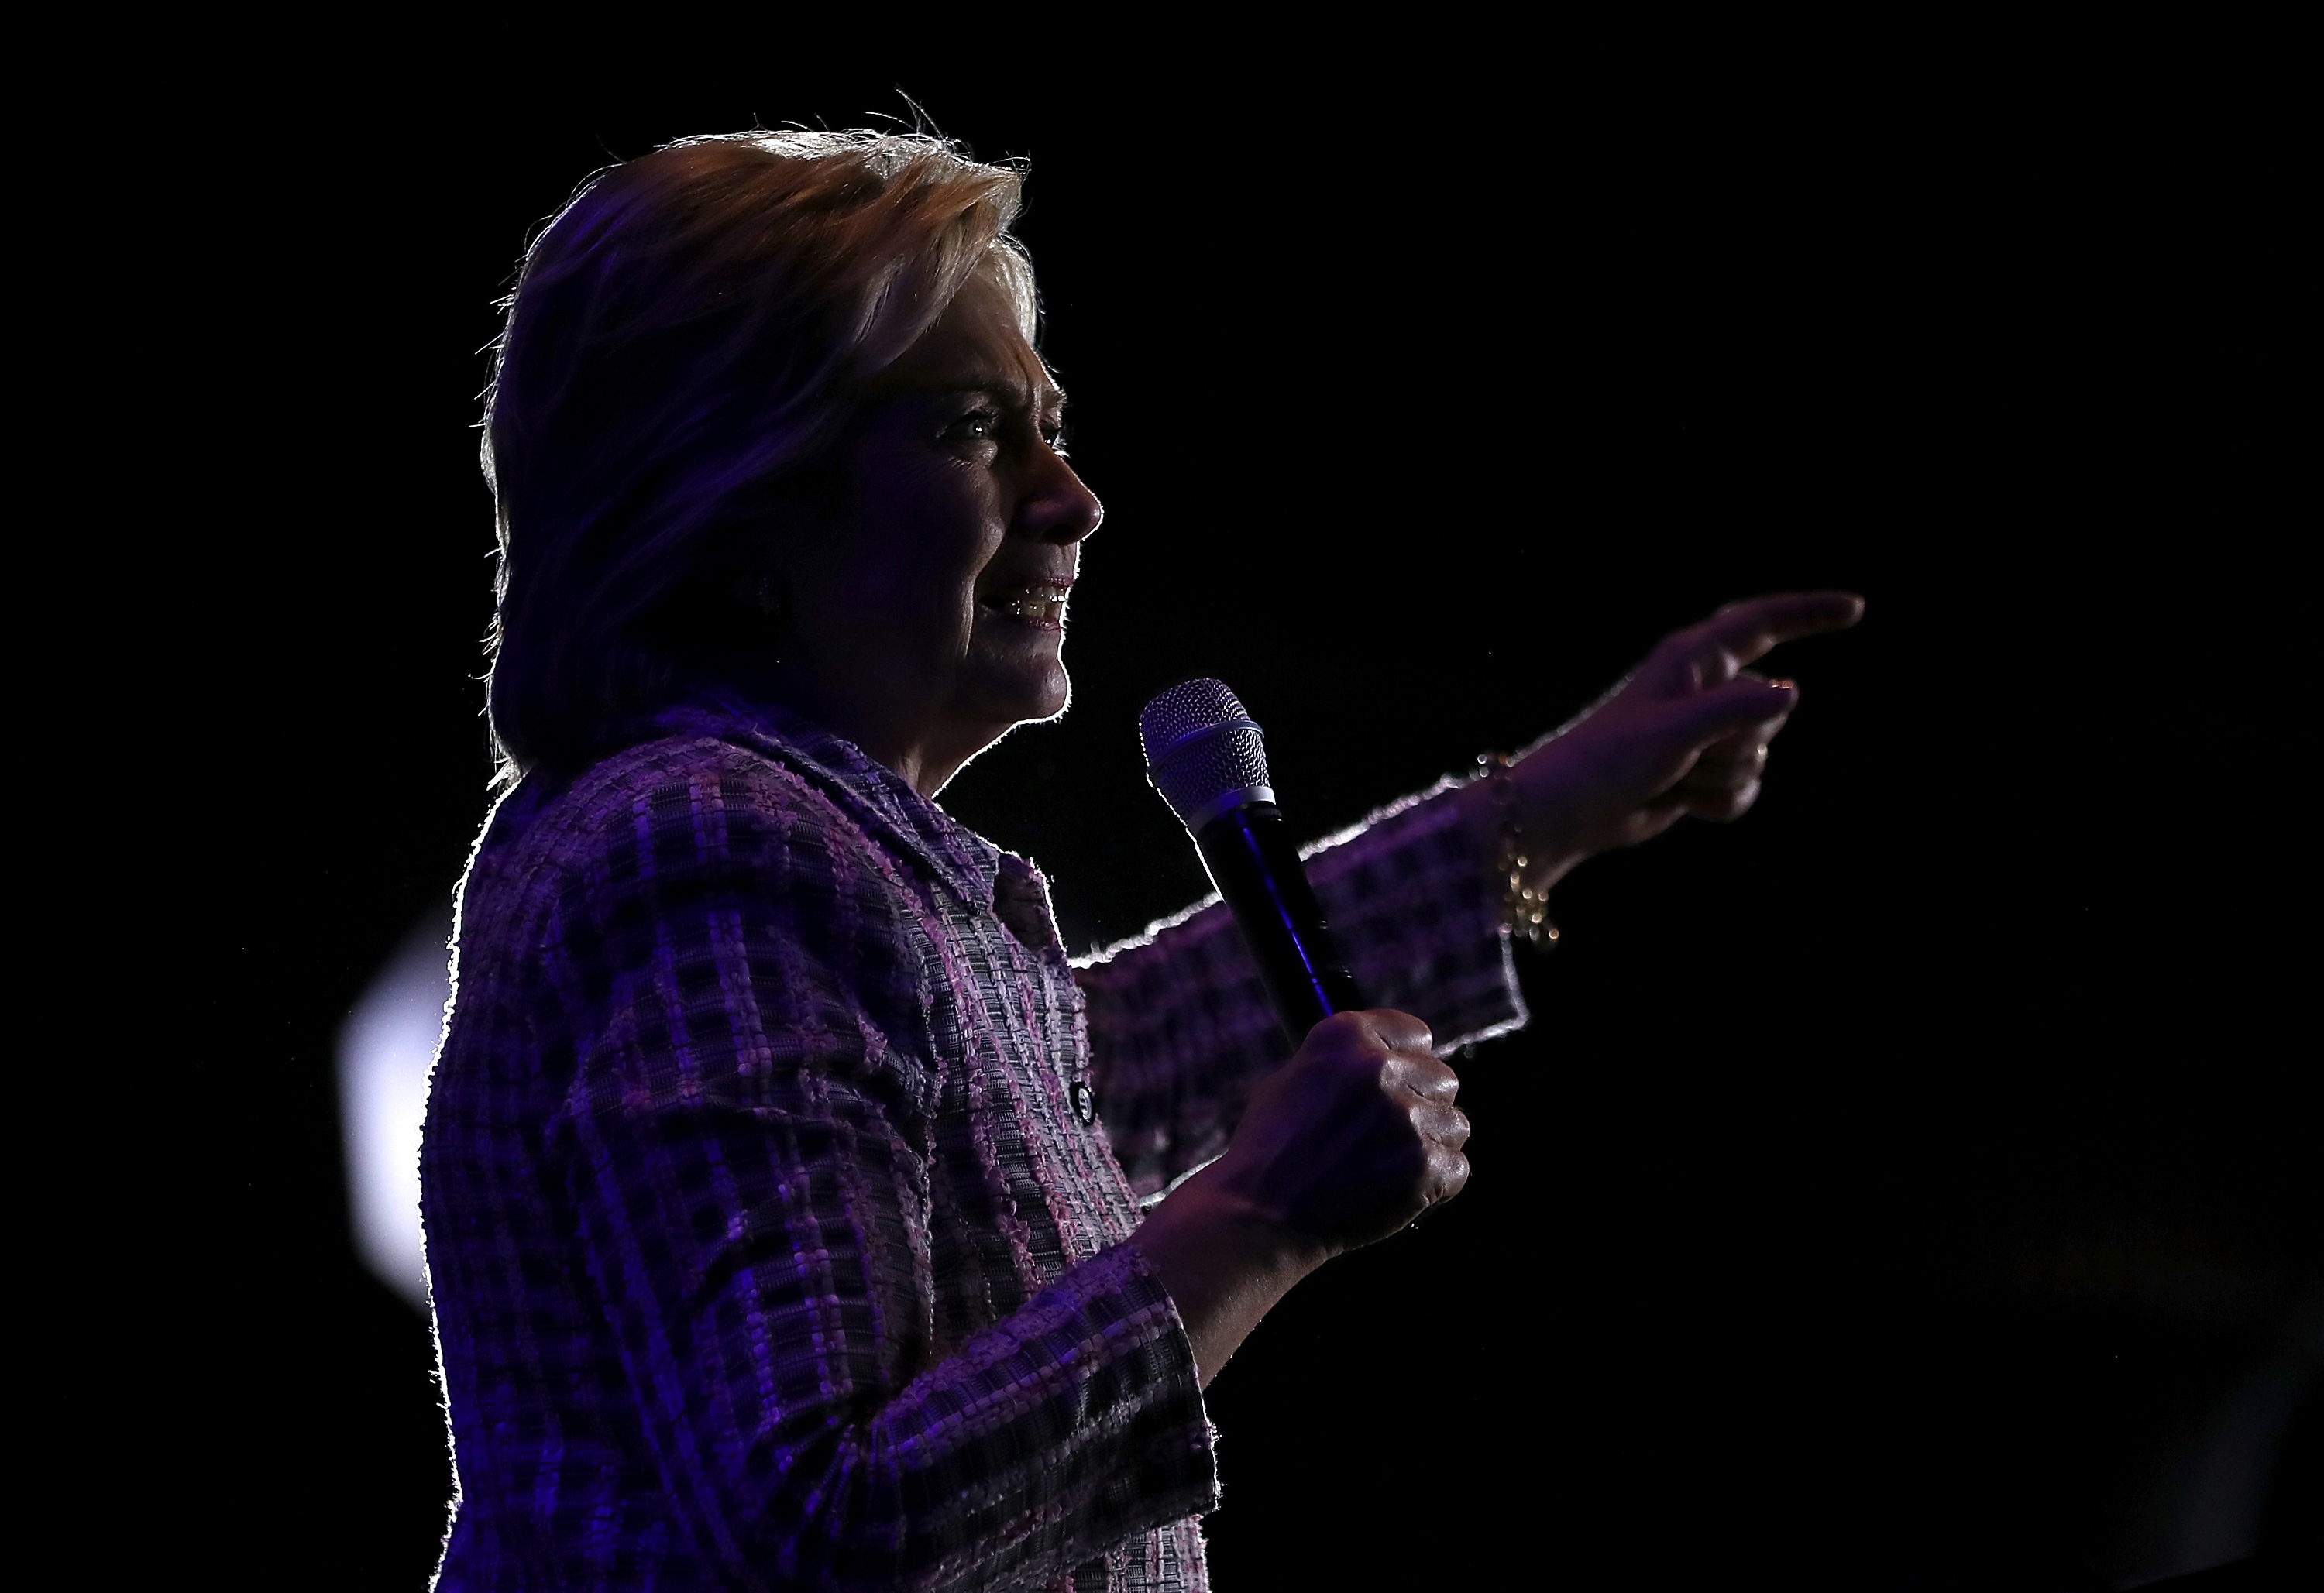 CHARLOTTE, NC - JULY 25: Democratic presidential candidate Hillary Clinton speaks during a Democratic Party organizing event on July 25, 2016 in Charlotte, North Carolina. On the first day of the Democratic National Convention, Clinton is campaigning in North Carolina.   Justin Sullivan/Getty Images/AFP